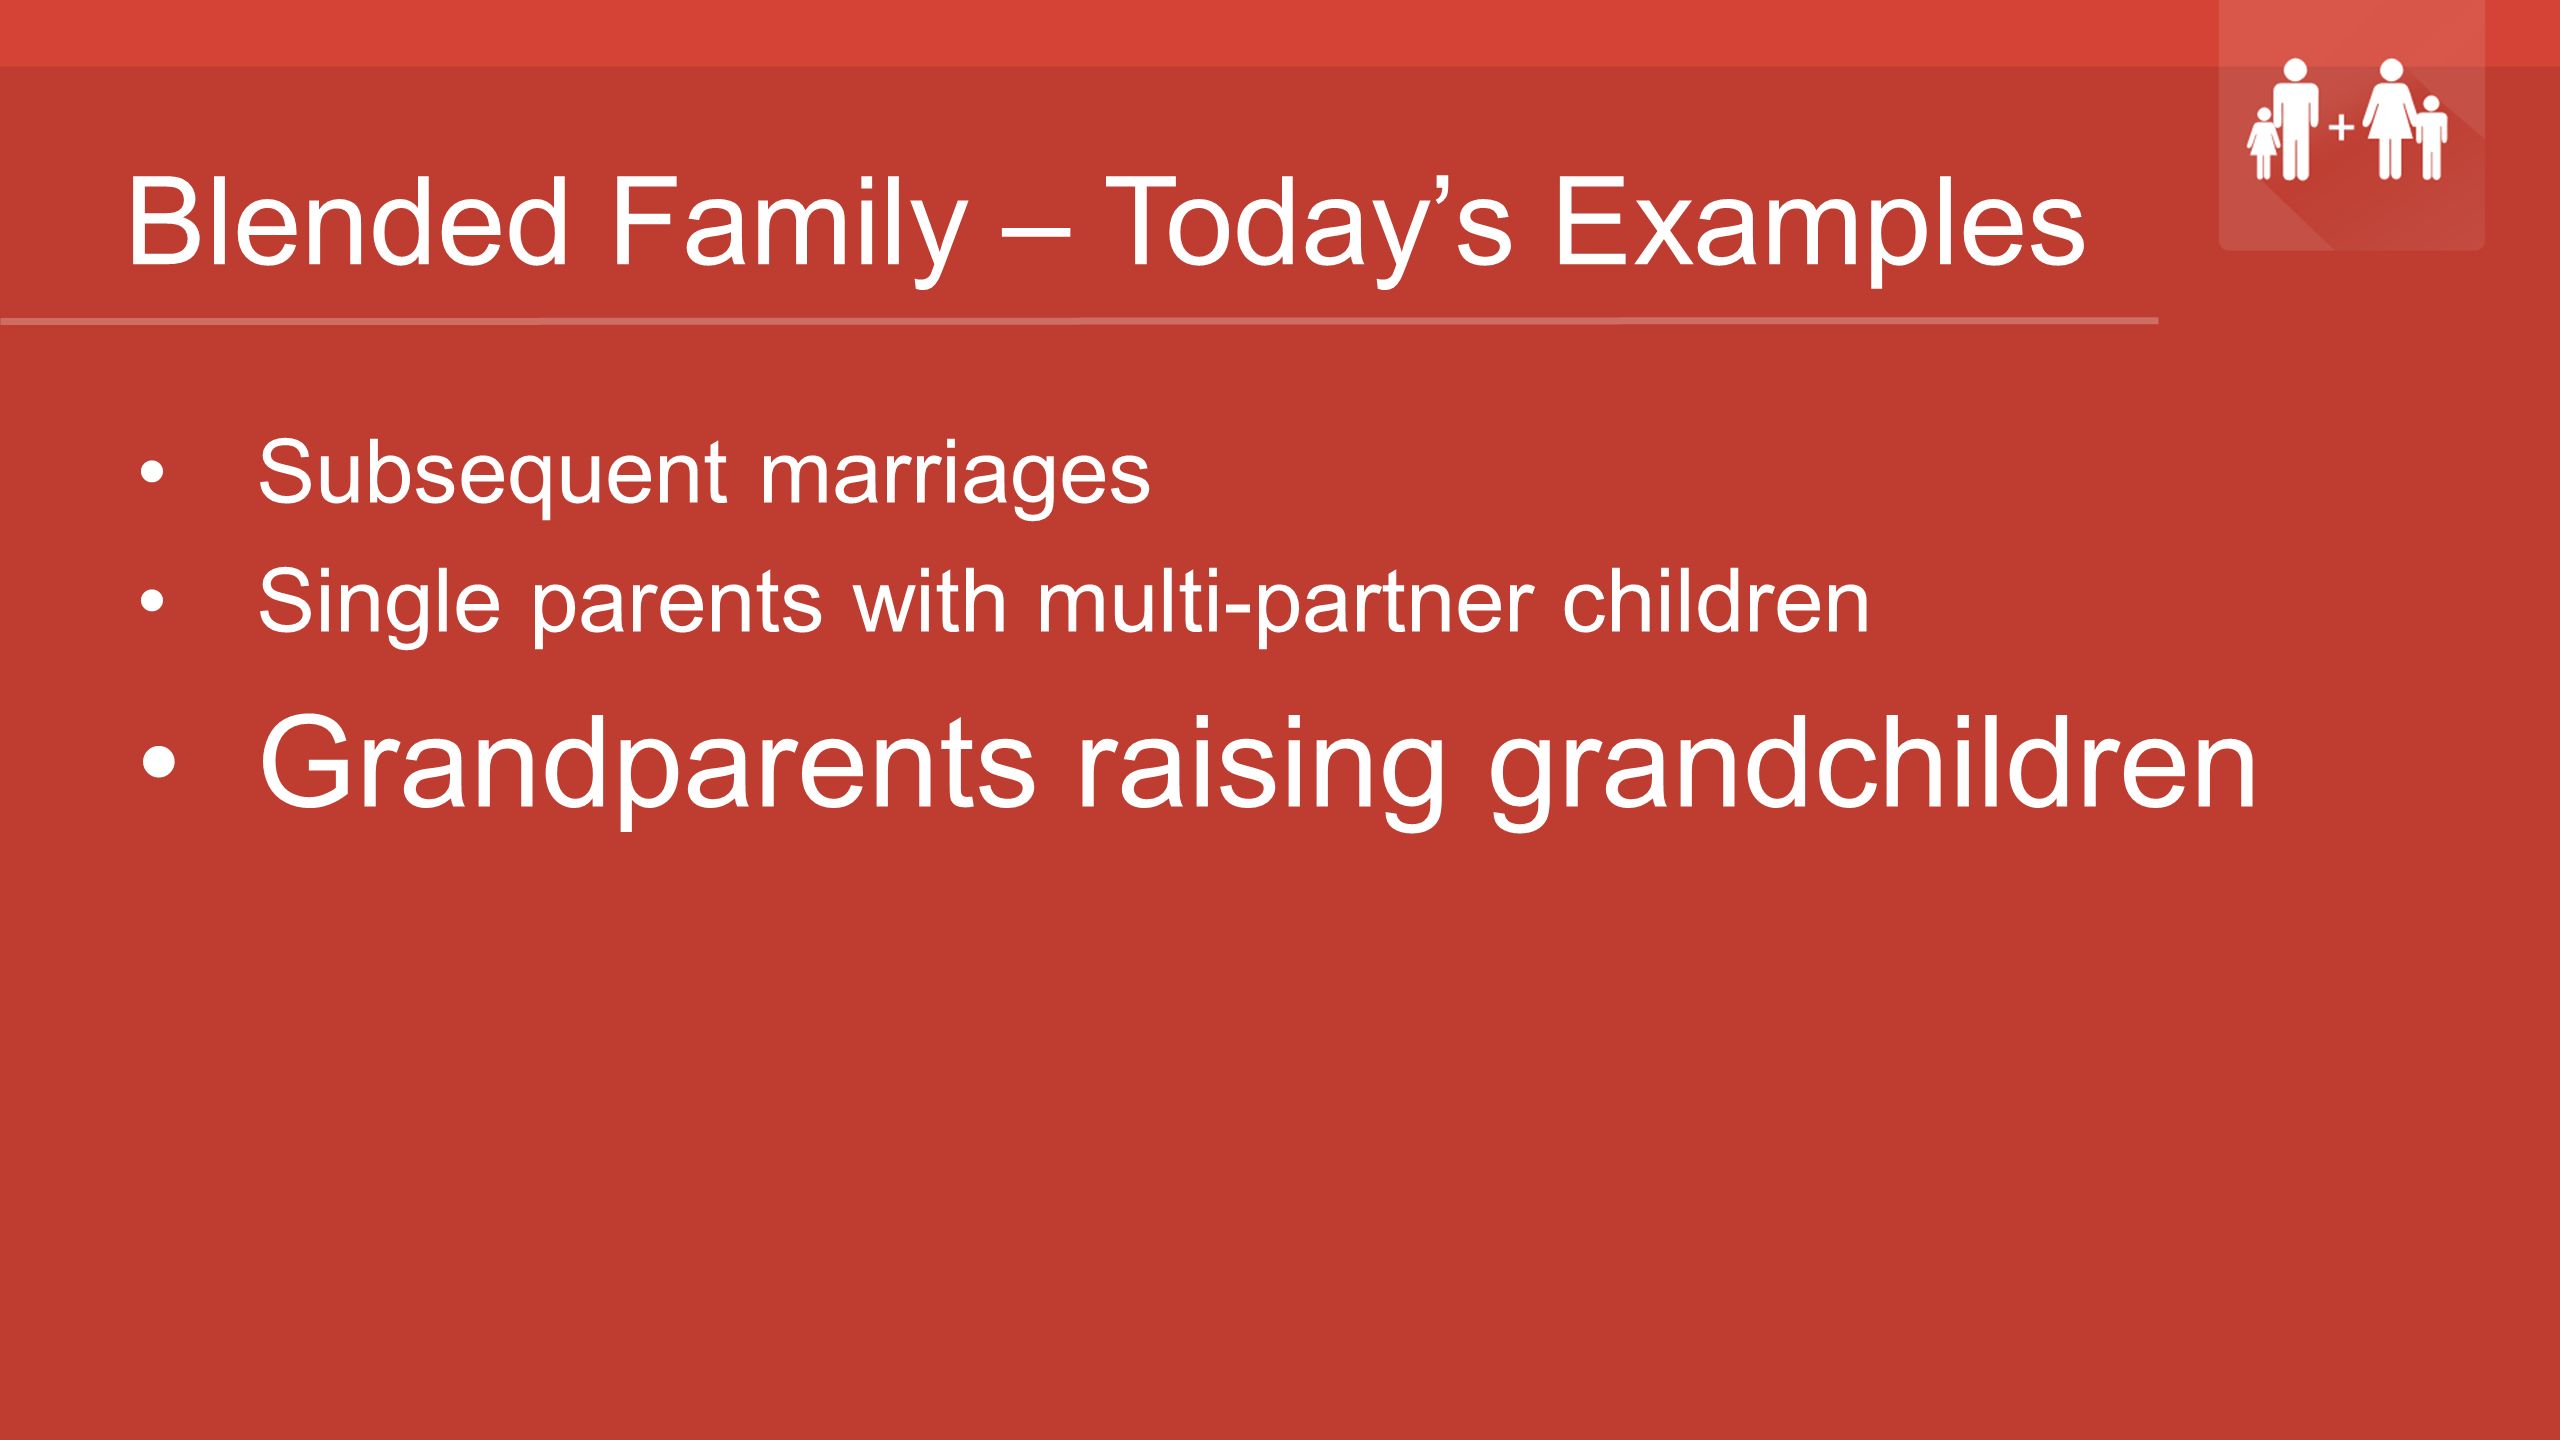 Blended Family – Today’s Examples Subsequent marriages Single parents with multi-partner children Grandparents raising grandchildren